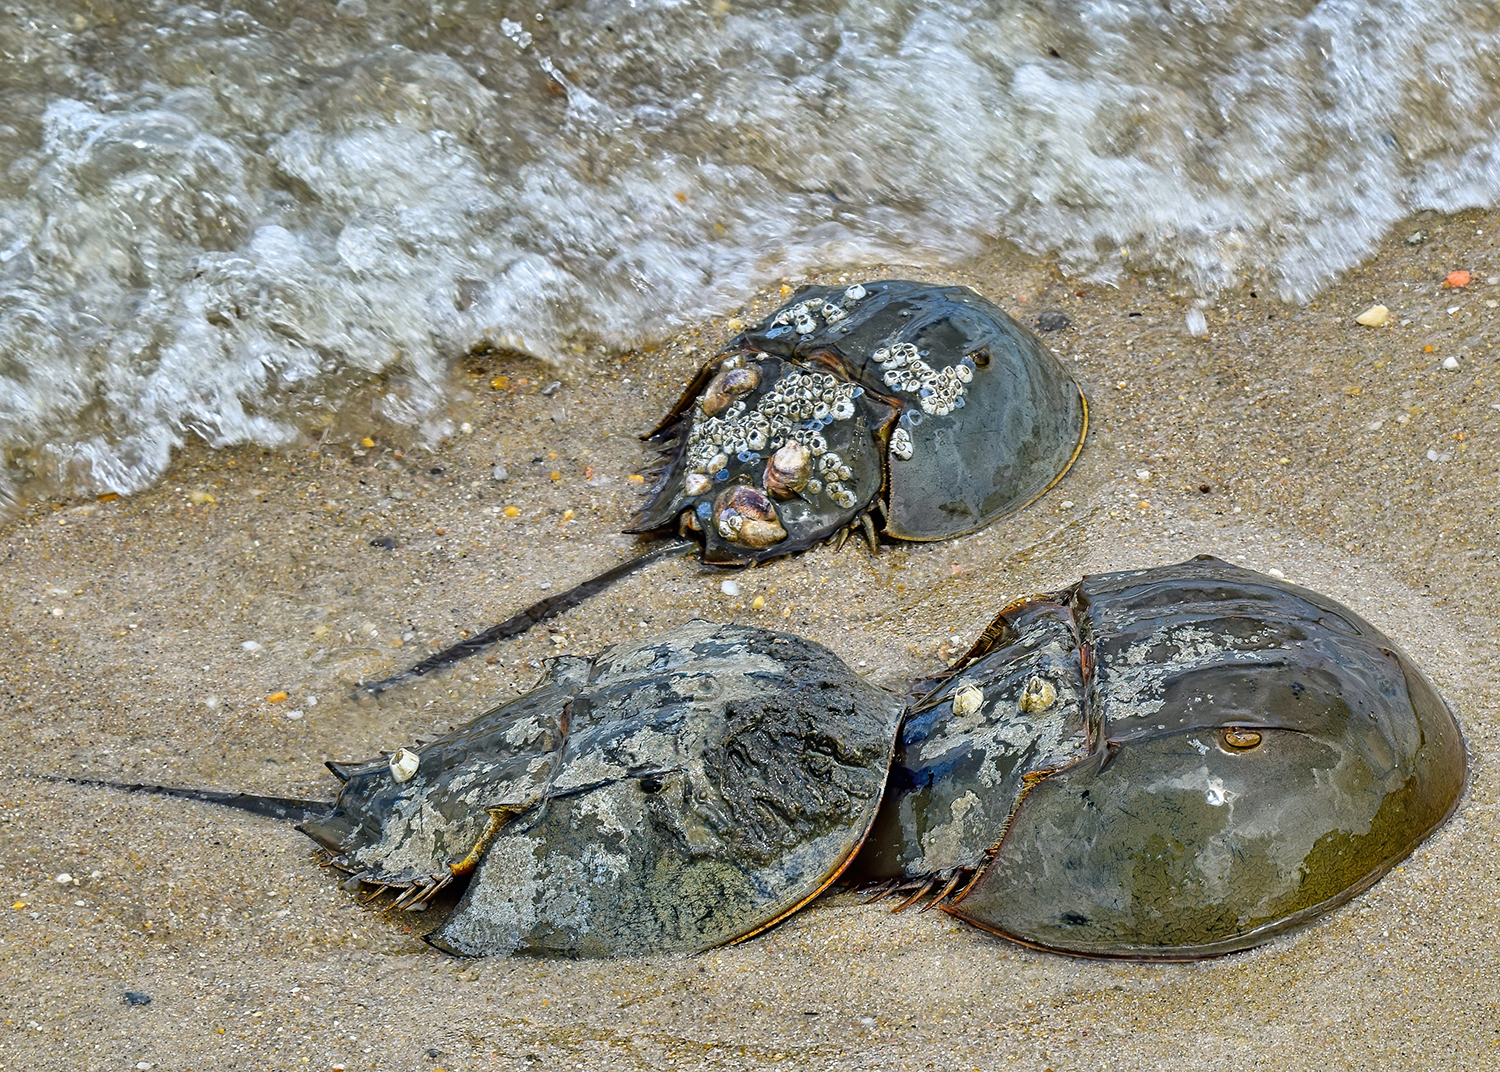 Spawning female horseshoe crabs usually come ashore with a male attached. Photo by Chris Engel